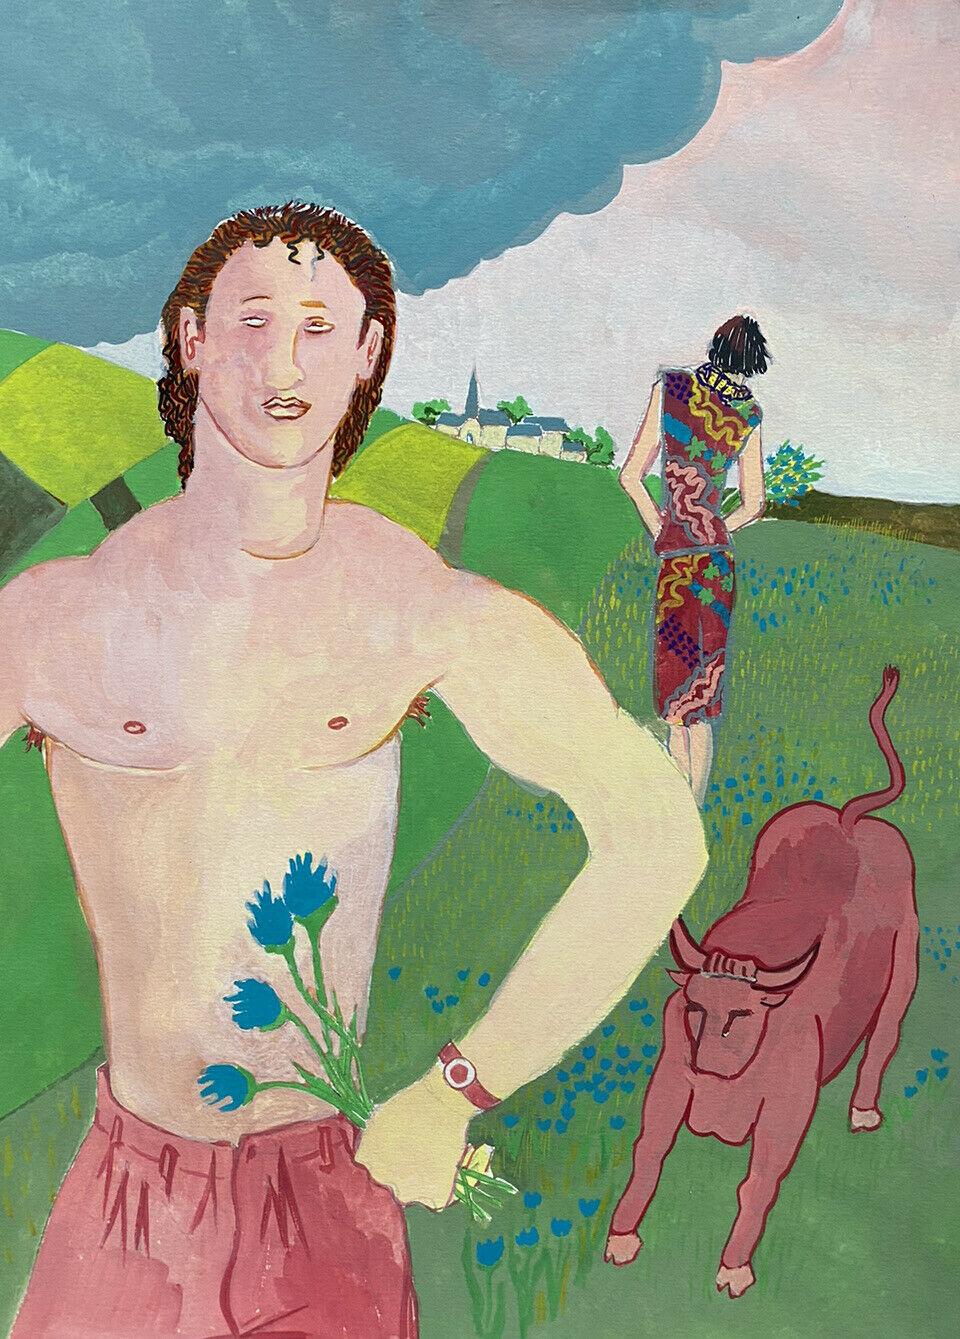 SEMI NUDE MALE WITH BULL IN LANDSCAPE - 20th CENTURY FRENCH MODERNIST PAINTING - Painting by Jean Marc